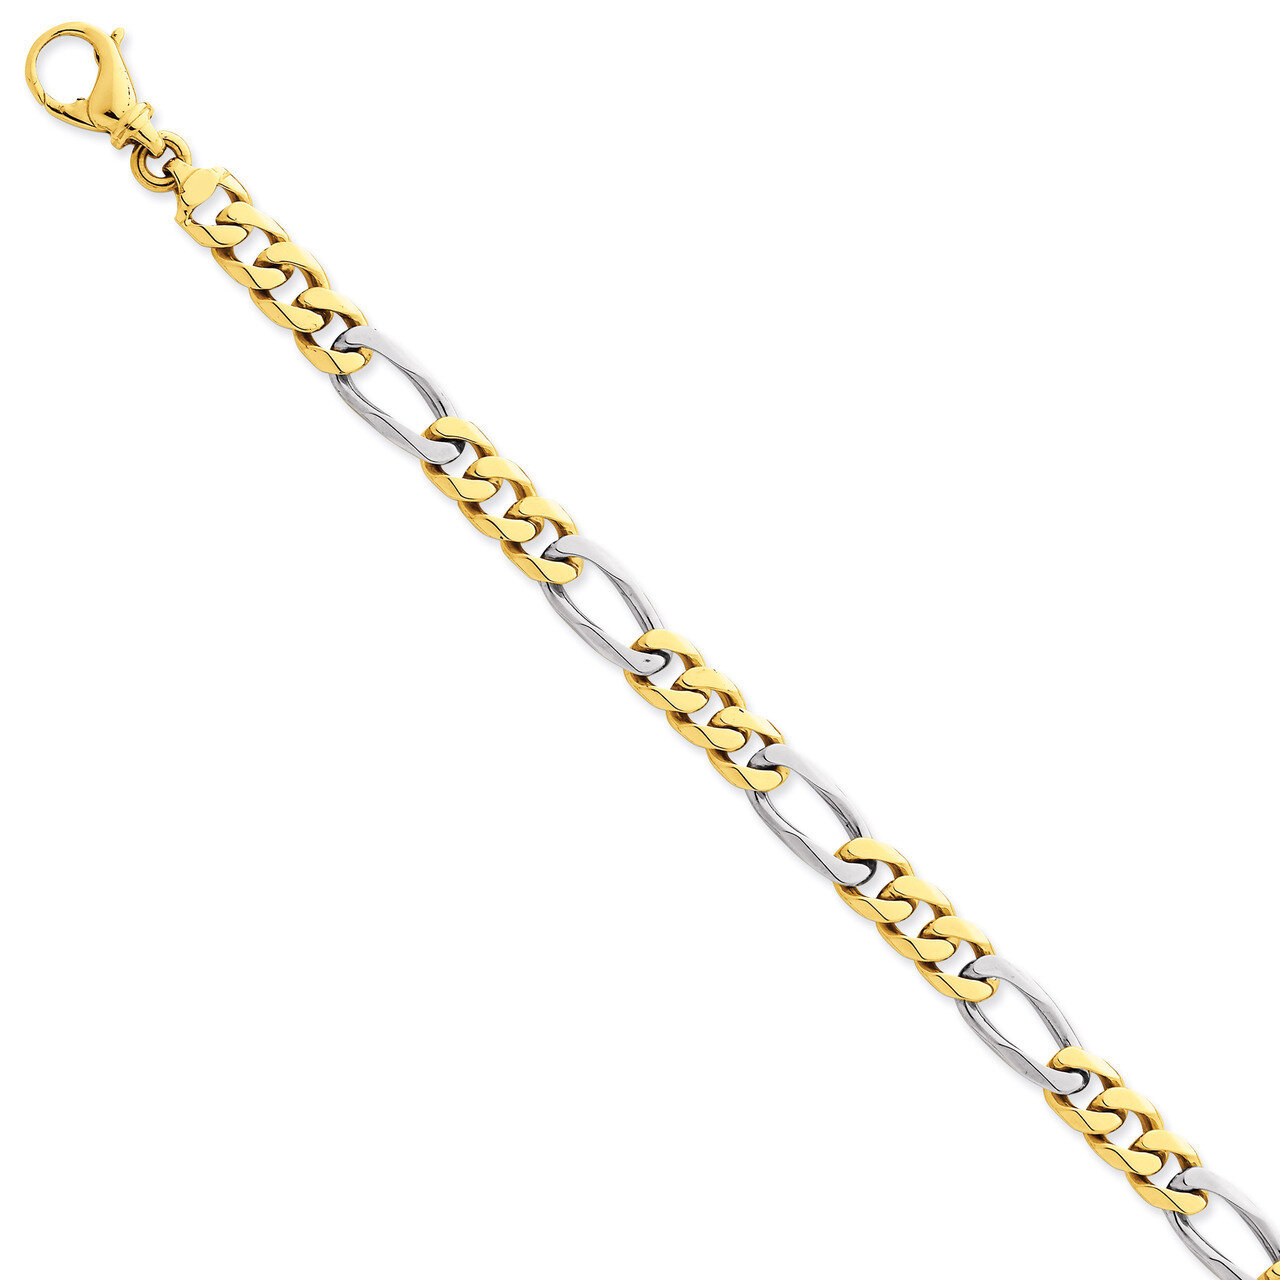 7.85mm Polished Fancy Link Chain 9 Inch 14k Two-Tone Gold LK489-9